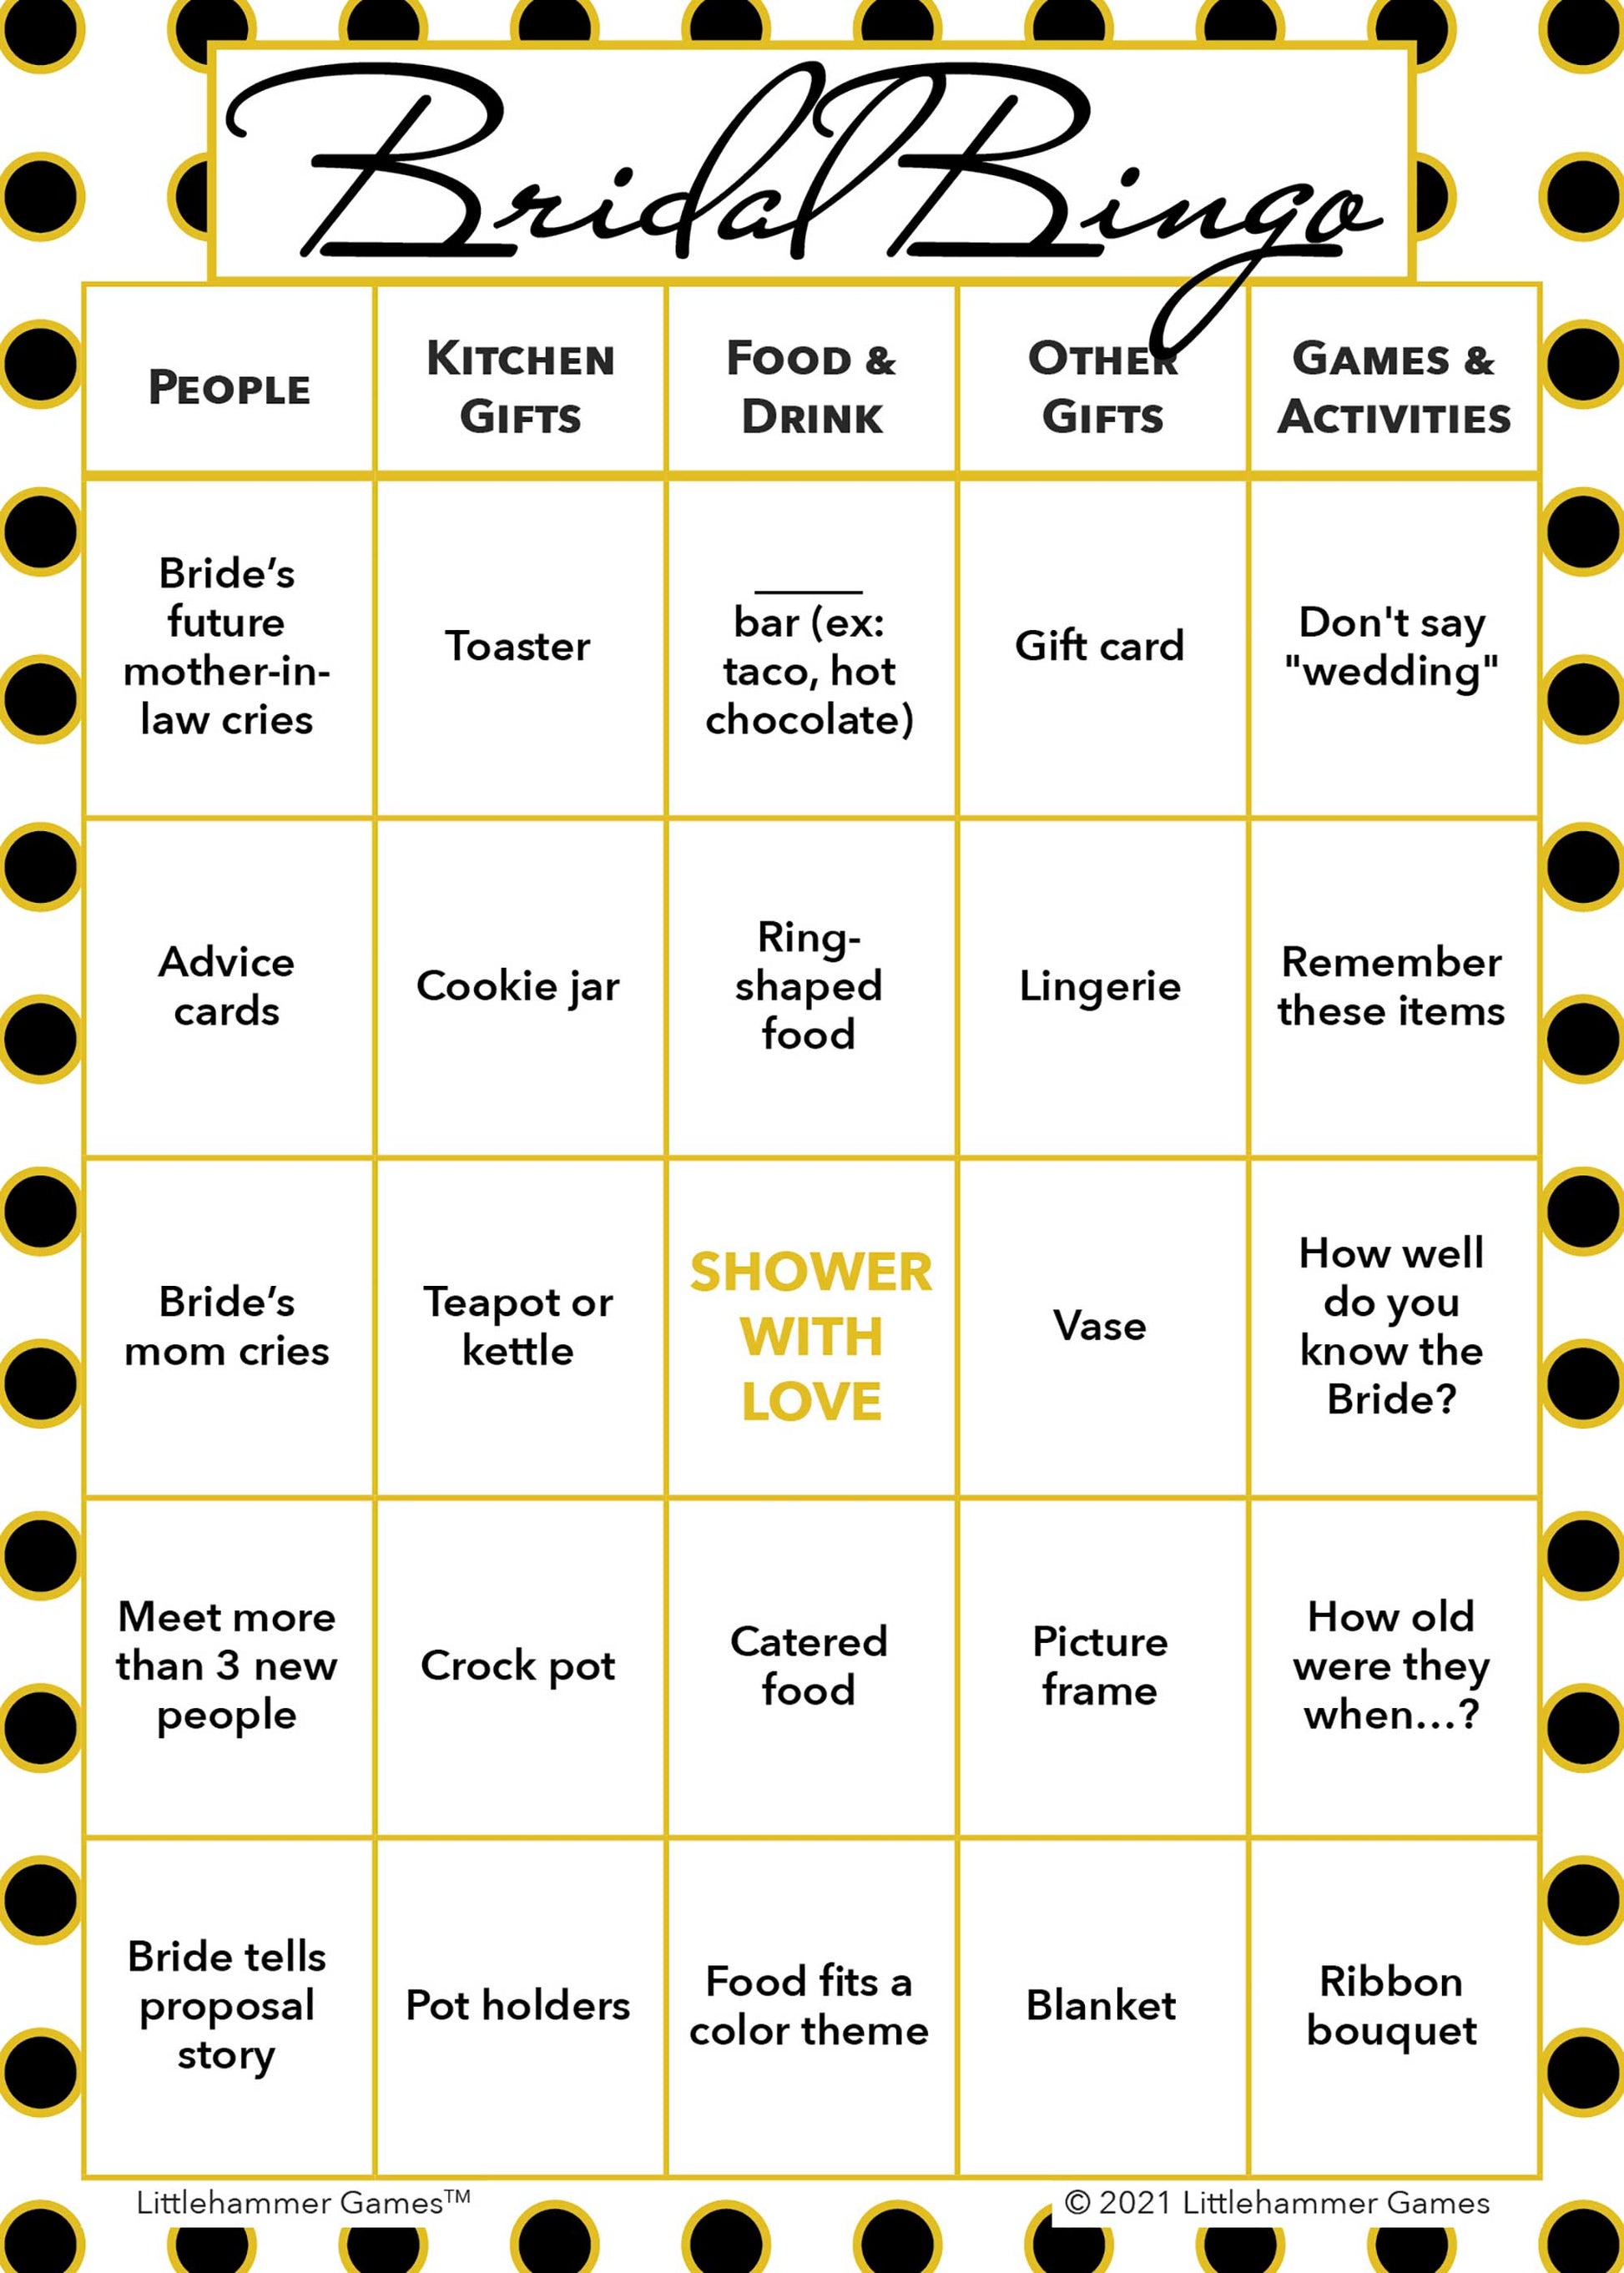 Bridal Bingo game card with a black and gold polka dot background